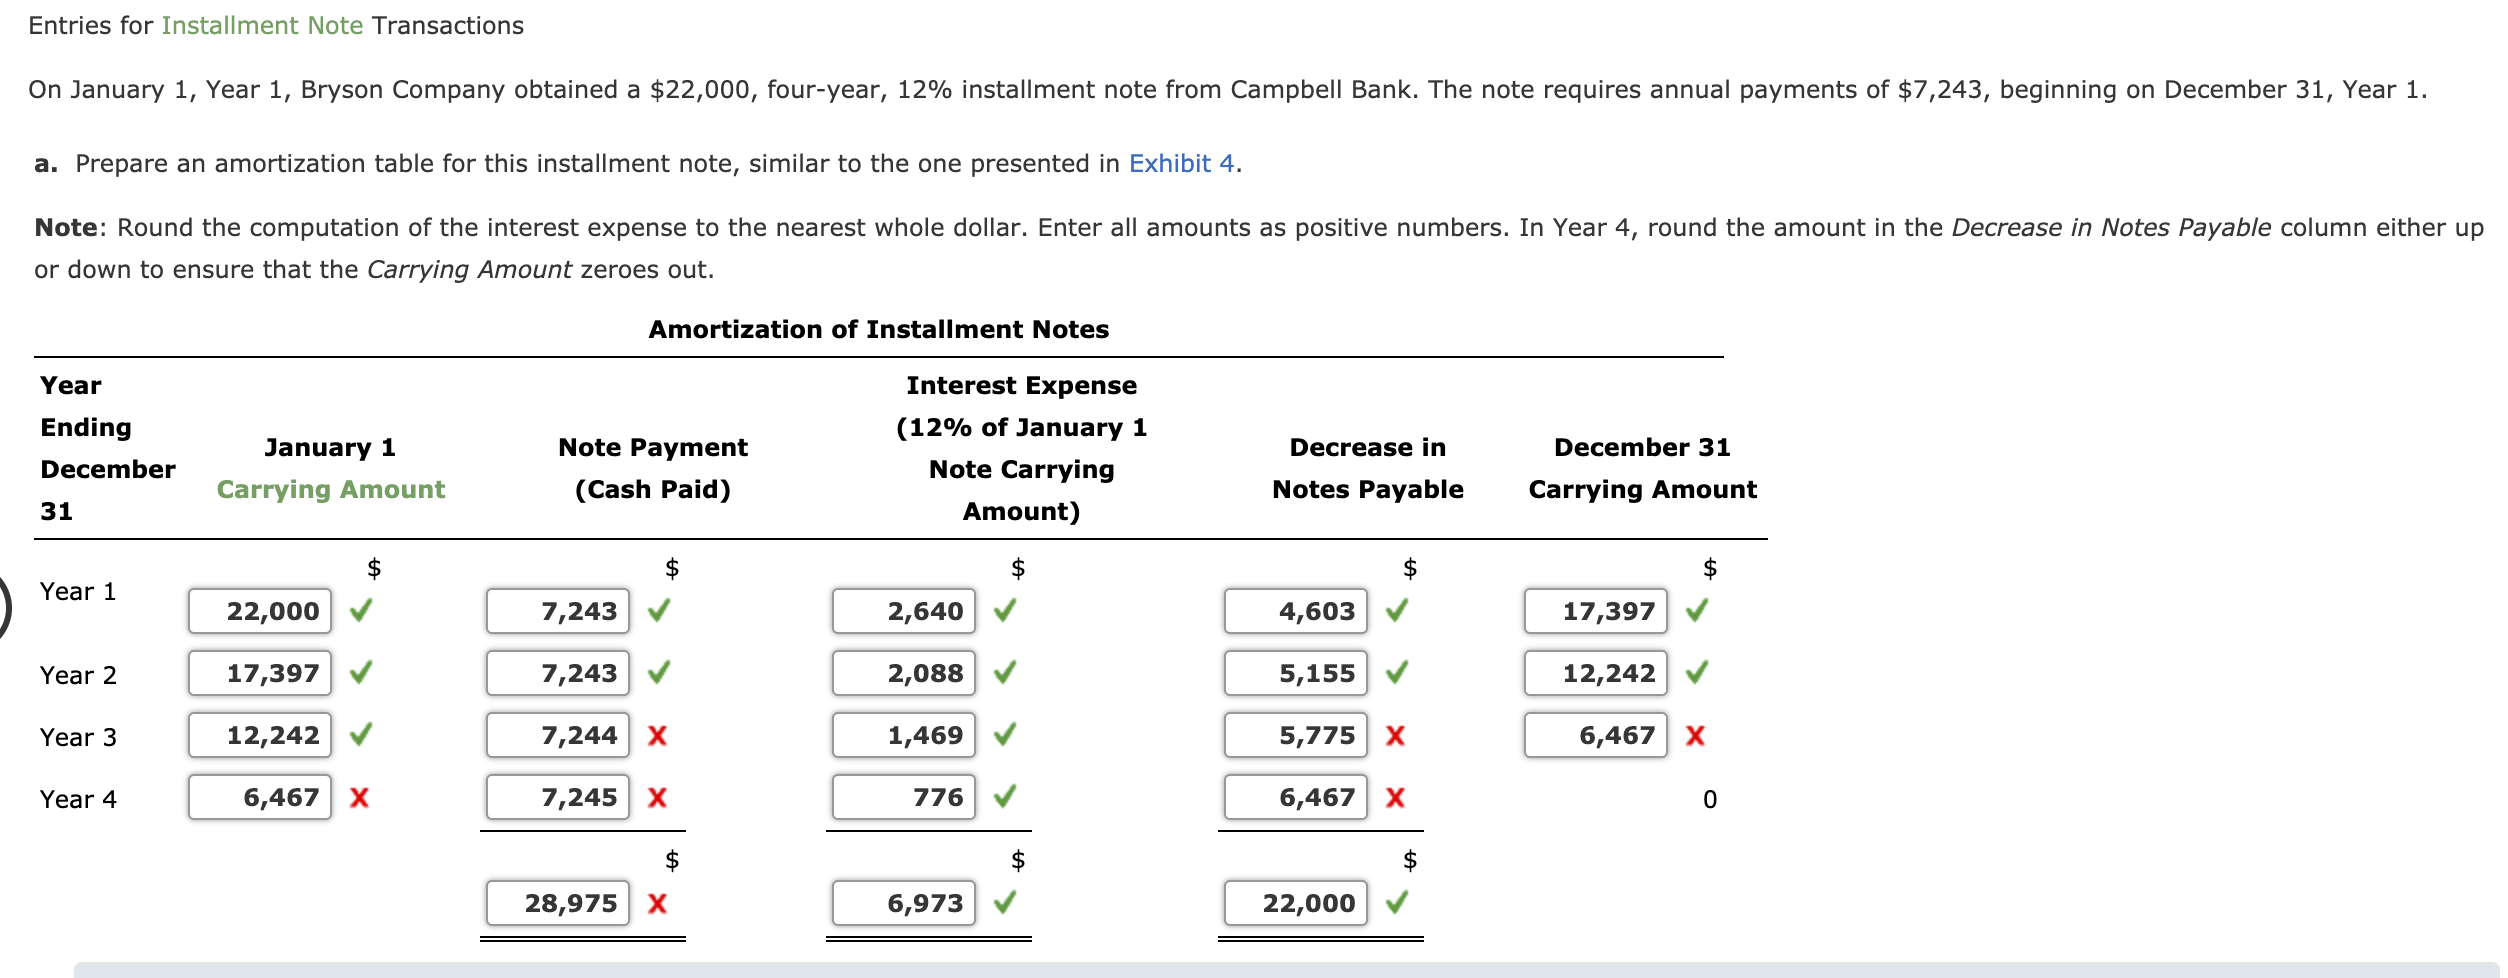 On January 1, Year 1, Bryson Company obtained a $22,000, four-year, 12% installment note from Campbell Bank. The note requires annual payments of $7,243, beginning on December 31, Year 1.
a. Prepare an amortization table for this installment note, similar to the one presented in Exhibit 4.
Note: Round the computation of the interest expense to the nearest whole dollar. Enter all amounts as positive numbers. In Year 4, round the amount in the Decrease in Notes Payable column either up
or down to ensure that the Carrying Amount zeroes out.
Amortization of Installment Notes
Year
Interest Expense
Ending
(12% of January 1
January 1
Note Payment
Decrease in
December 31
December
Note Carrying
Carrying Amount
(Cash Paid)
Notes Payable
Carrying Amount
31
Amount)
$
$
$
Year 1
22,000 V
7,243
2,640
4,603
17,397 V
Year 2
17,397 V
7,243
2,088
5,155
12,242 V
Year 3
12,242 V
7,244 X
1,469
5,775 X
6,467 X
Year 4
6,467 X
7,245 X
776
6,467
28,975 X
6,973
22,000
